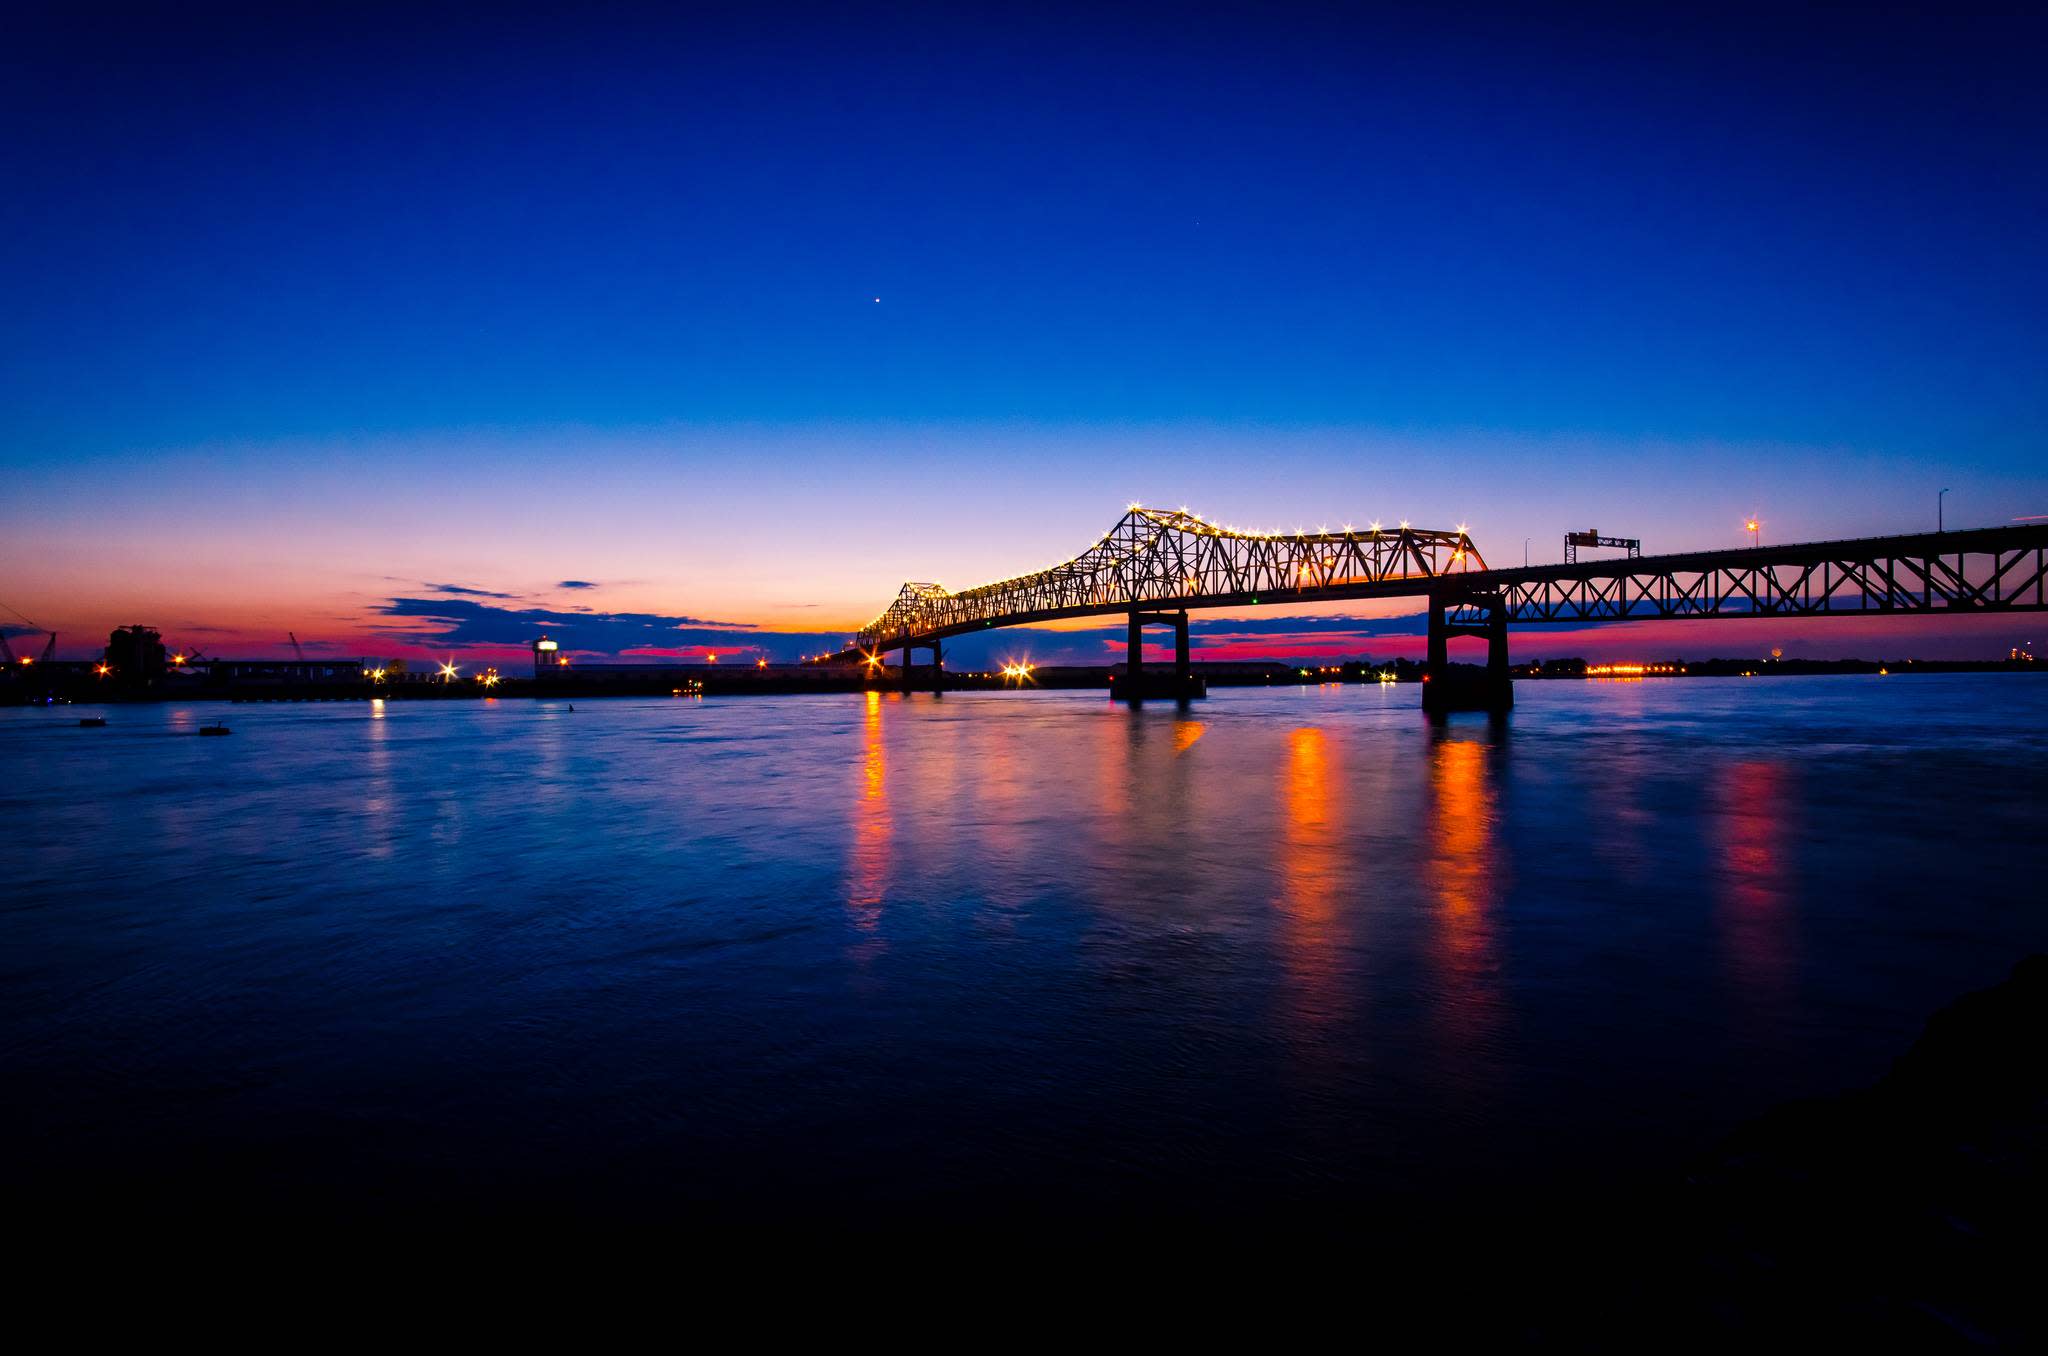 25 Photos Of Baton Rouge That Will Make You Want To Move There